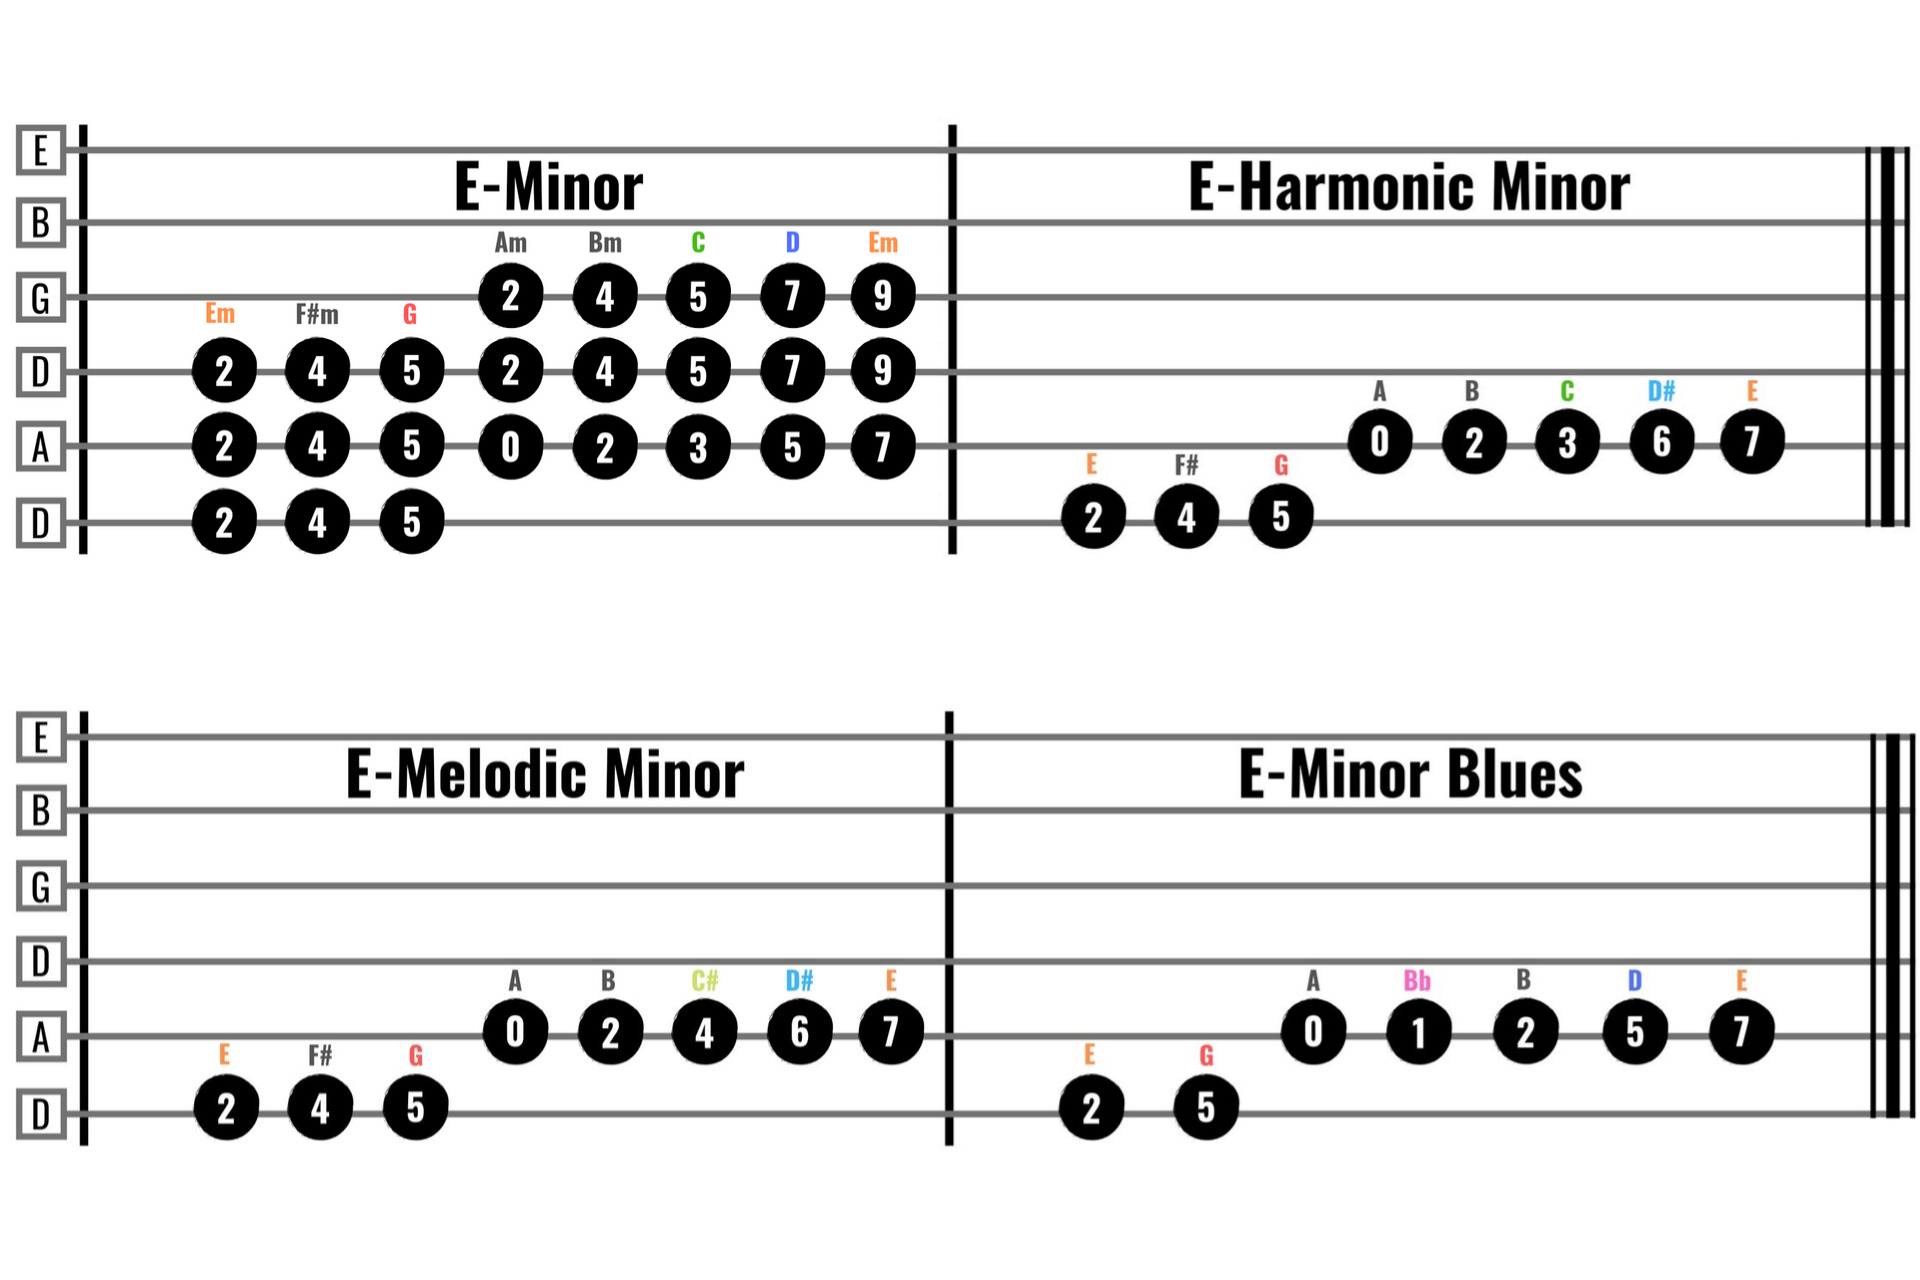 E-minor scales and chords